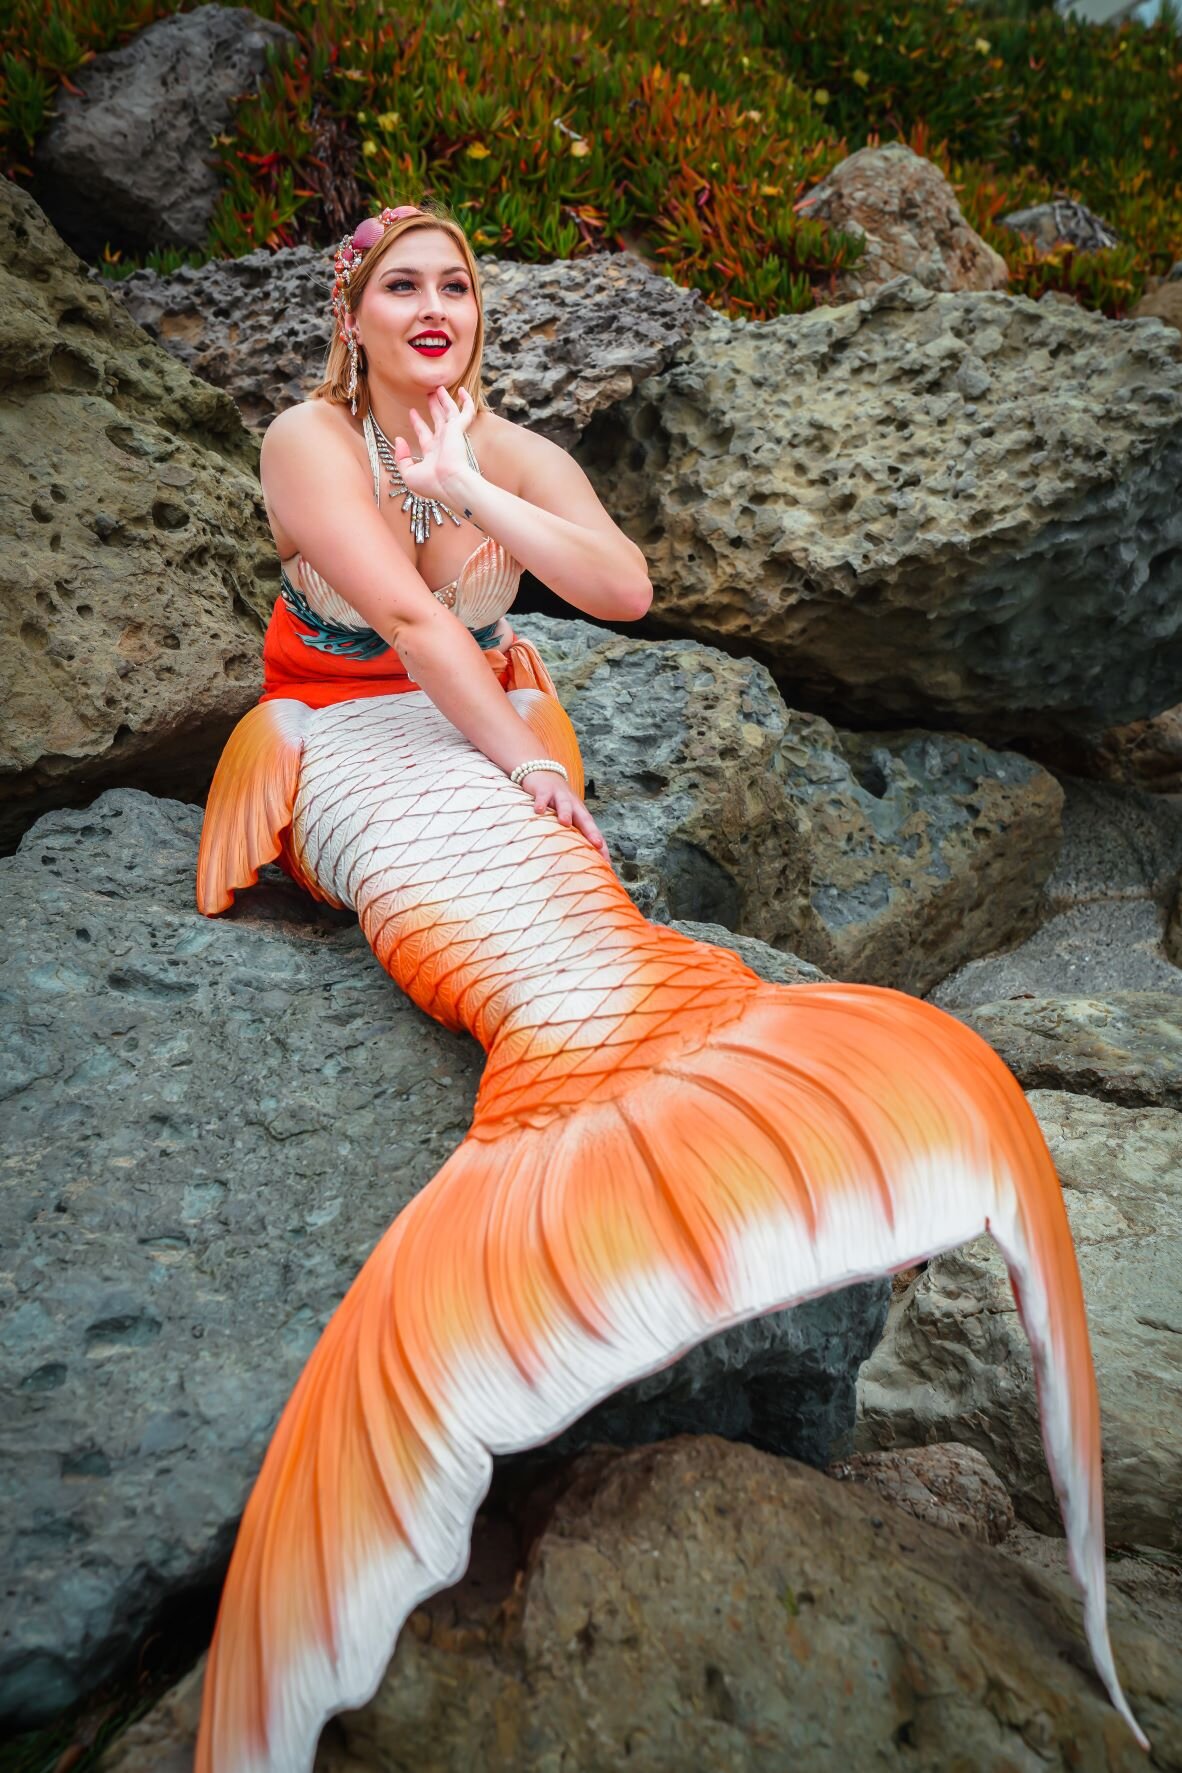 Meet Mermaid Orielle - A bubbly and fun professional mermaid entertainer in Orange CA. — Sheroes Entertainment